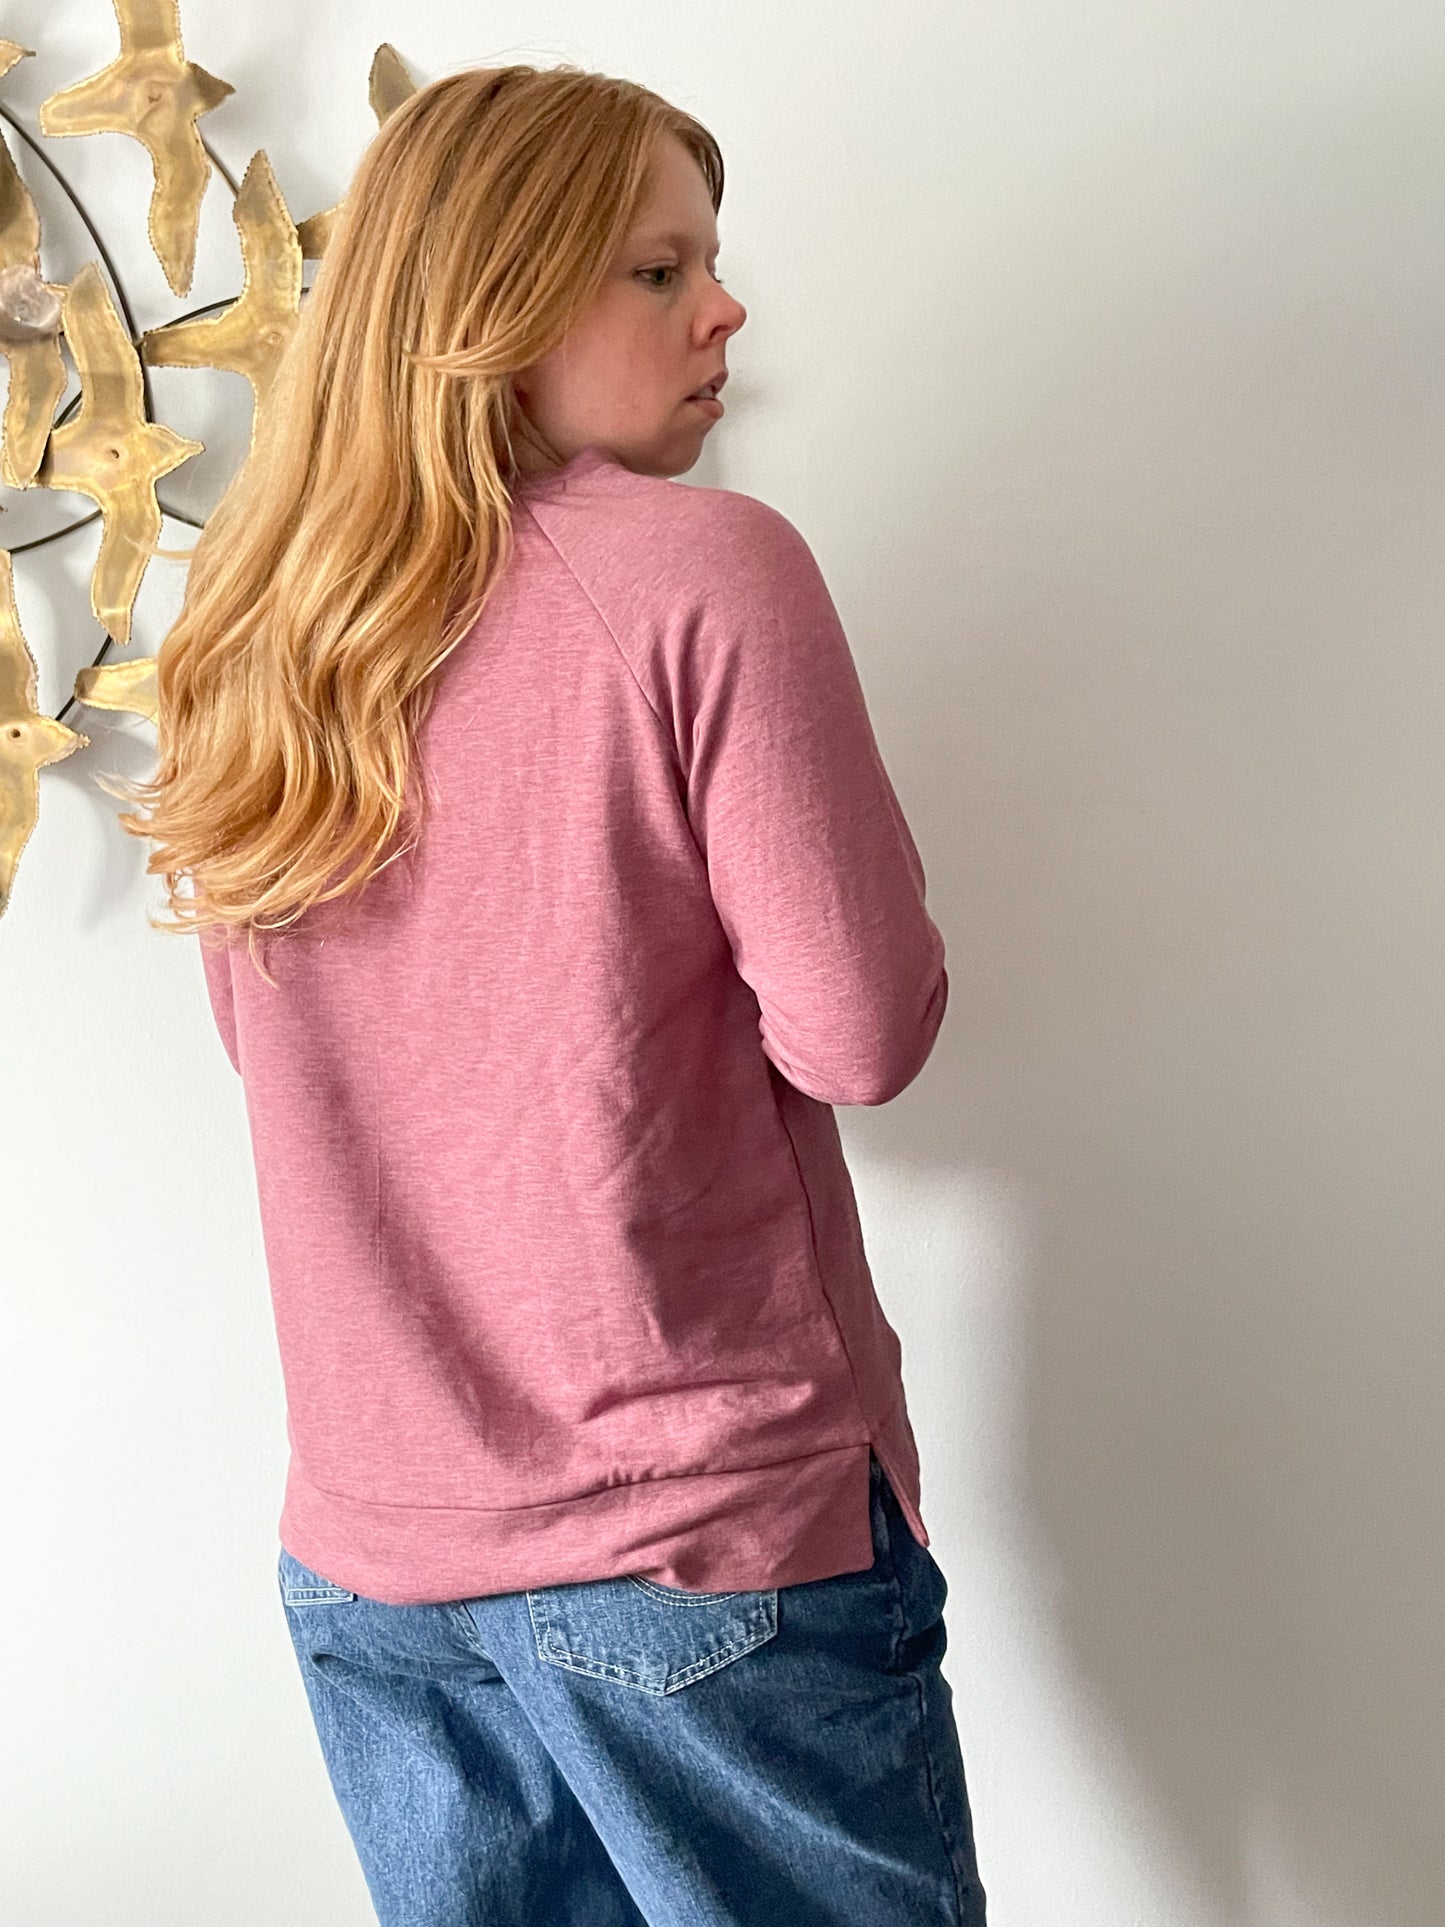 Upcycled Heathered Dark Pink Sweater with Sparkling Falling Feathers - M/L